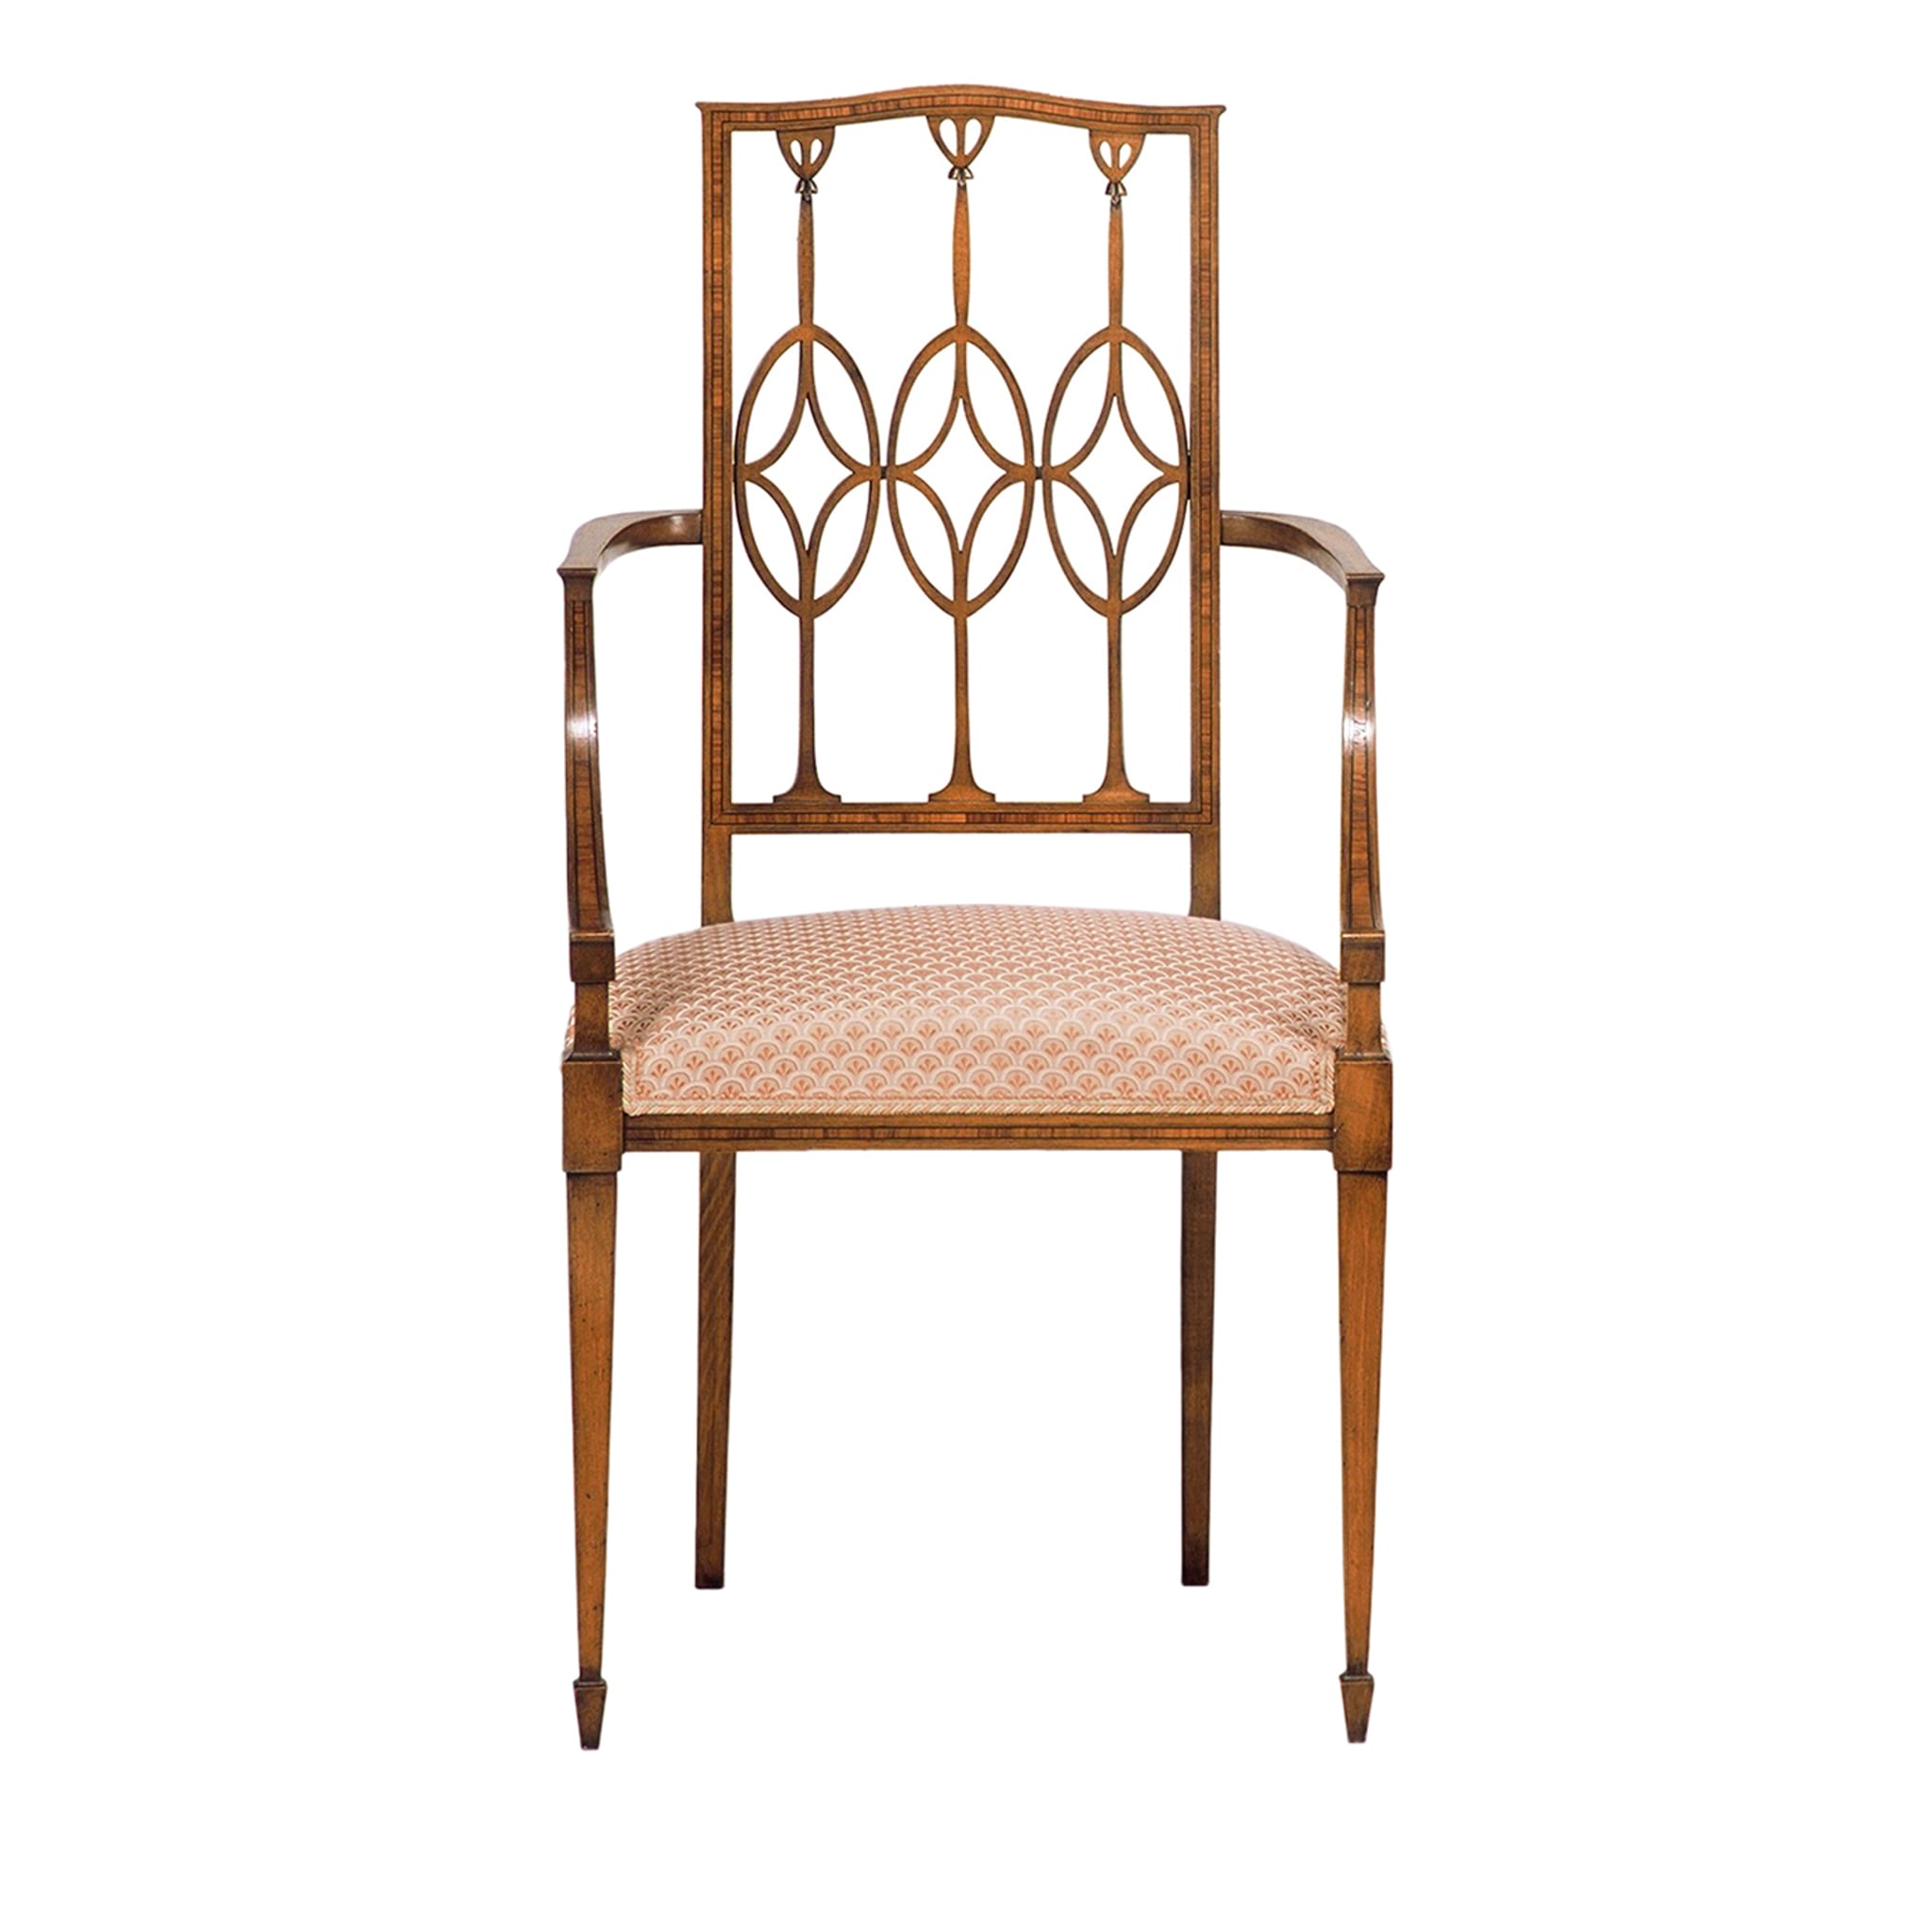 Hepplewhite-Style Rosewood & Beech Chair with Arms - Main view